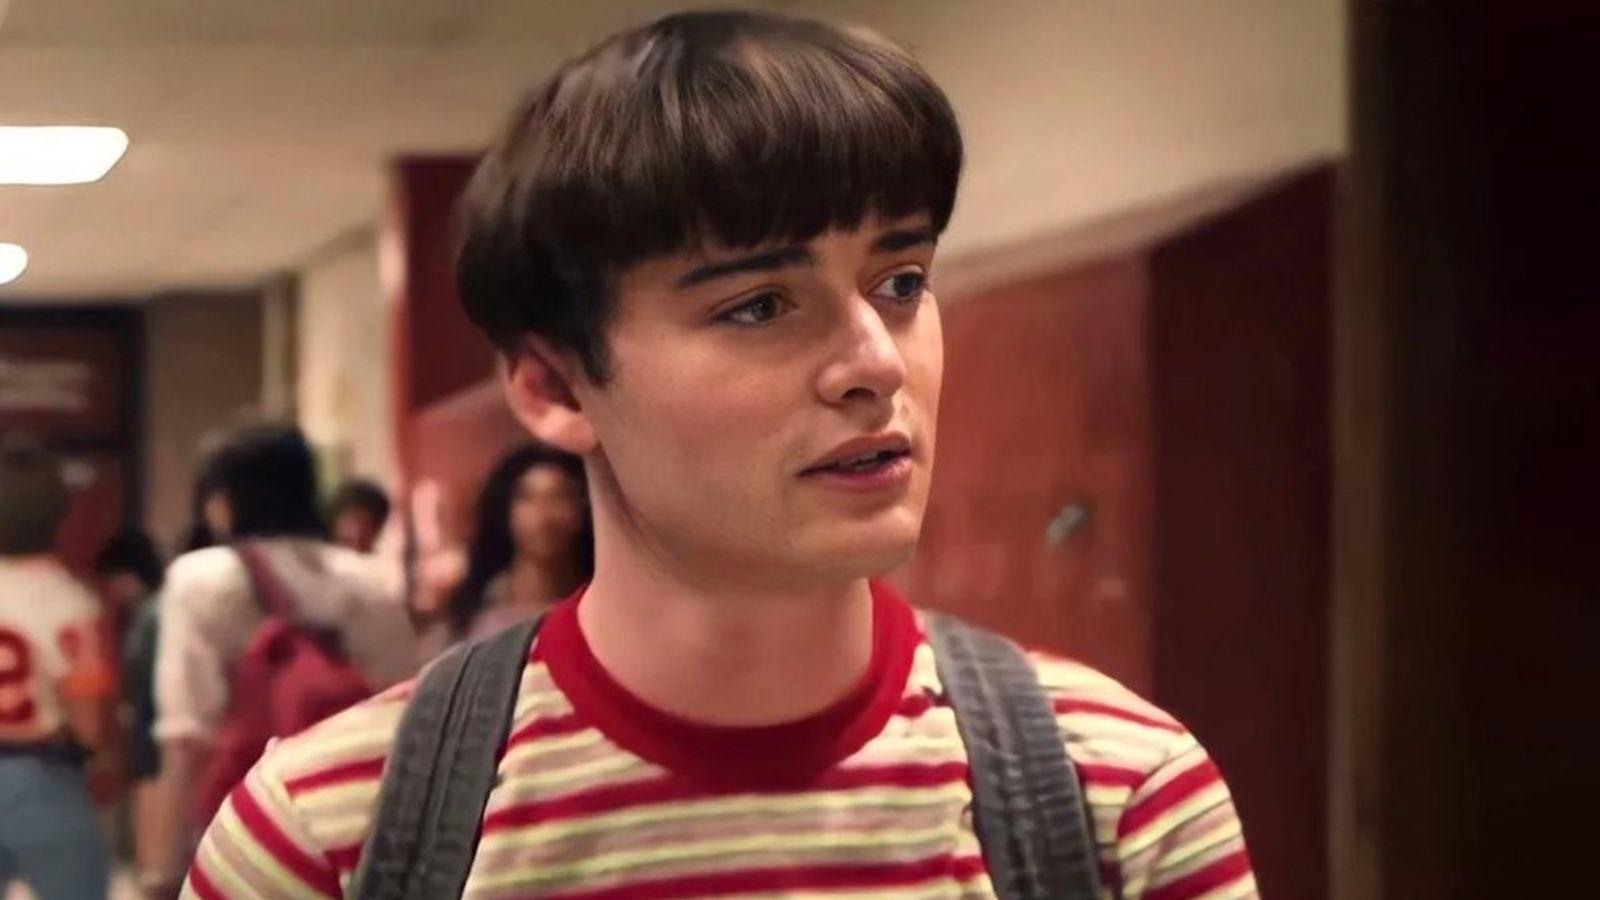 Will Byers (Stranger Things). Personality type